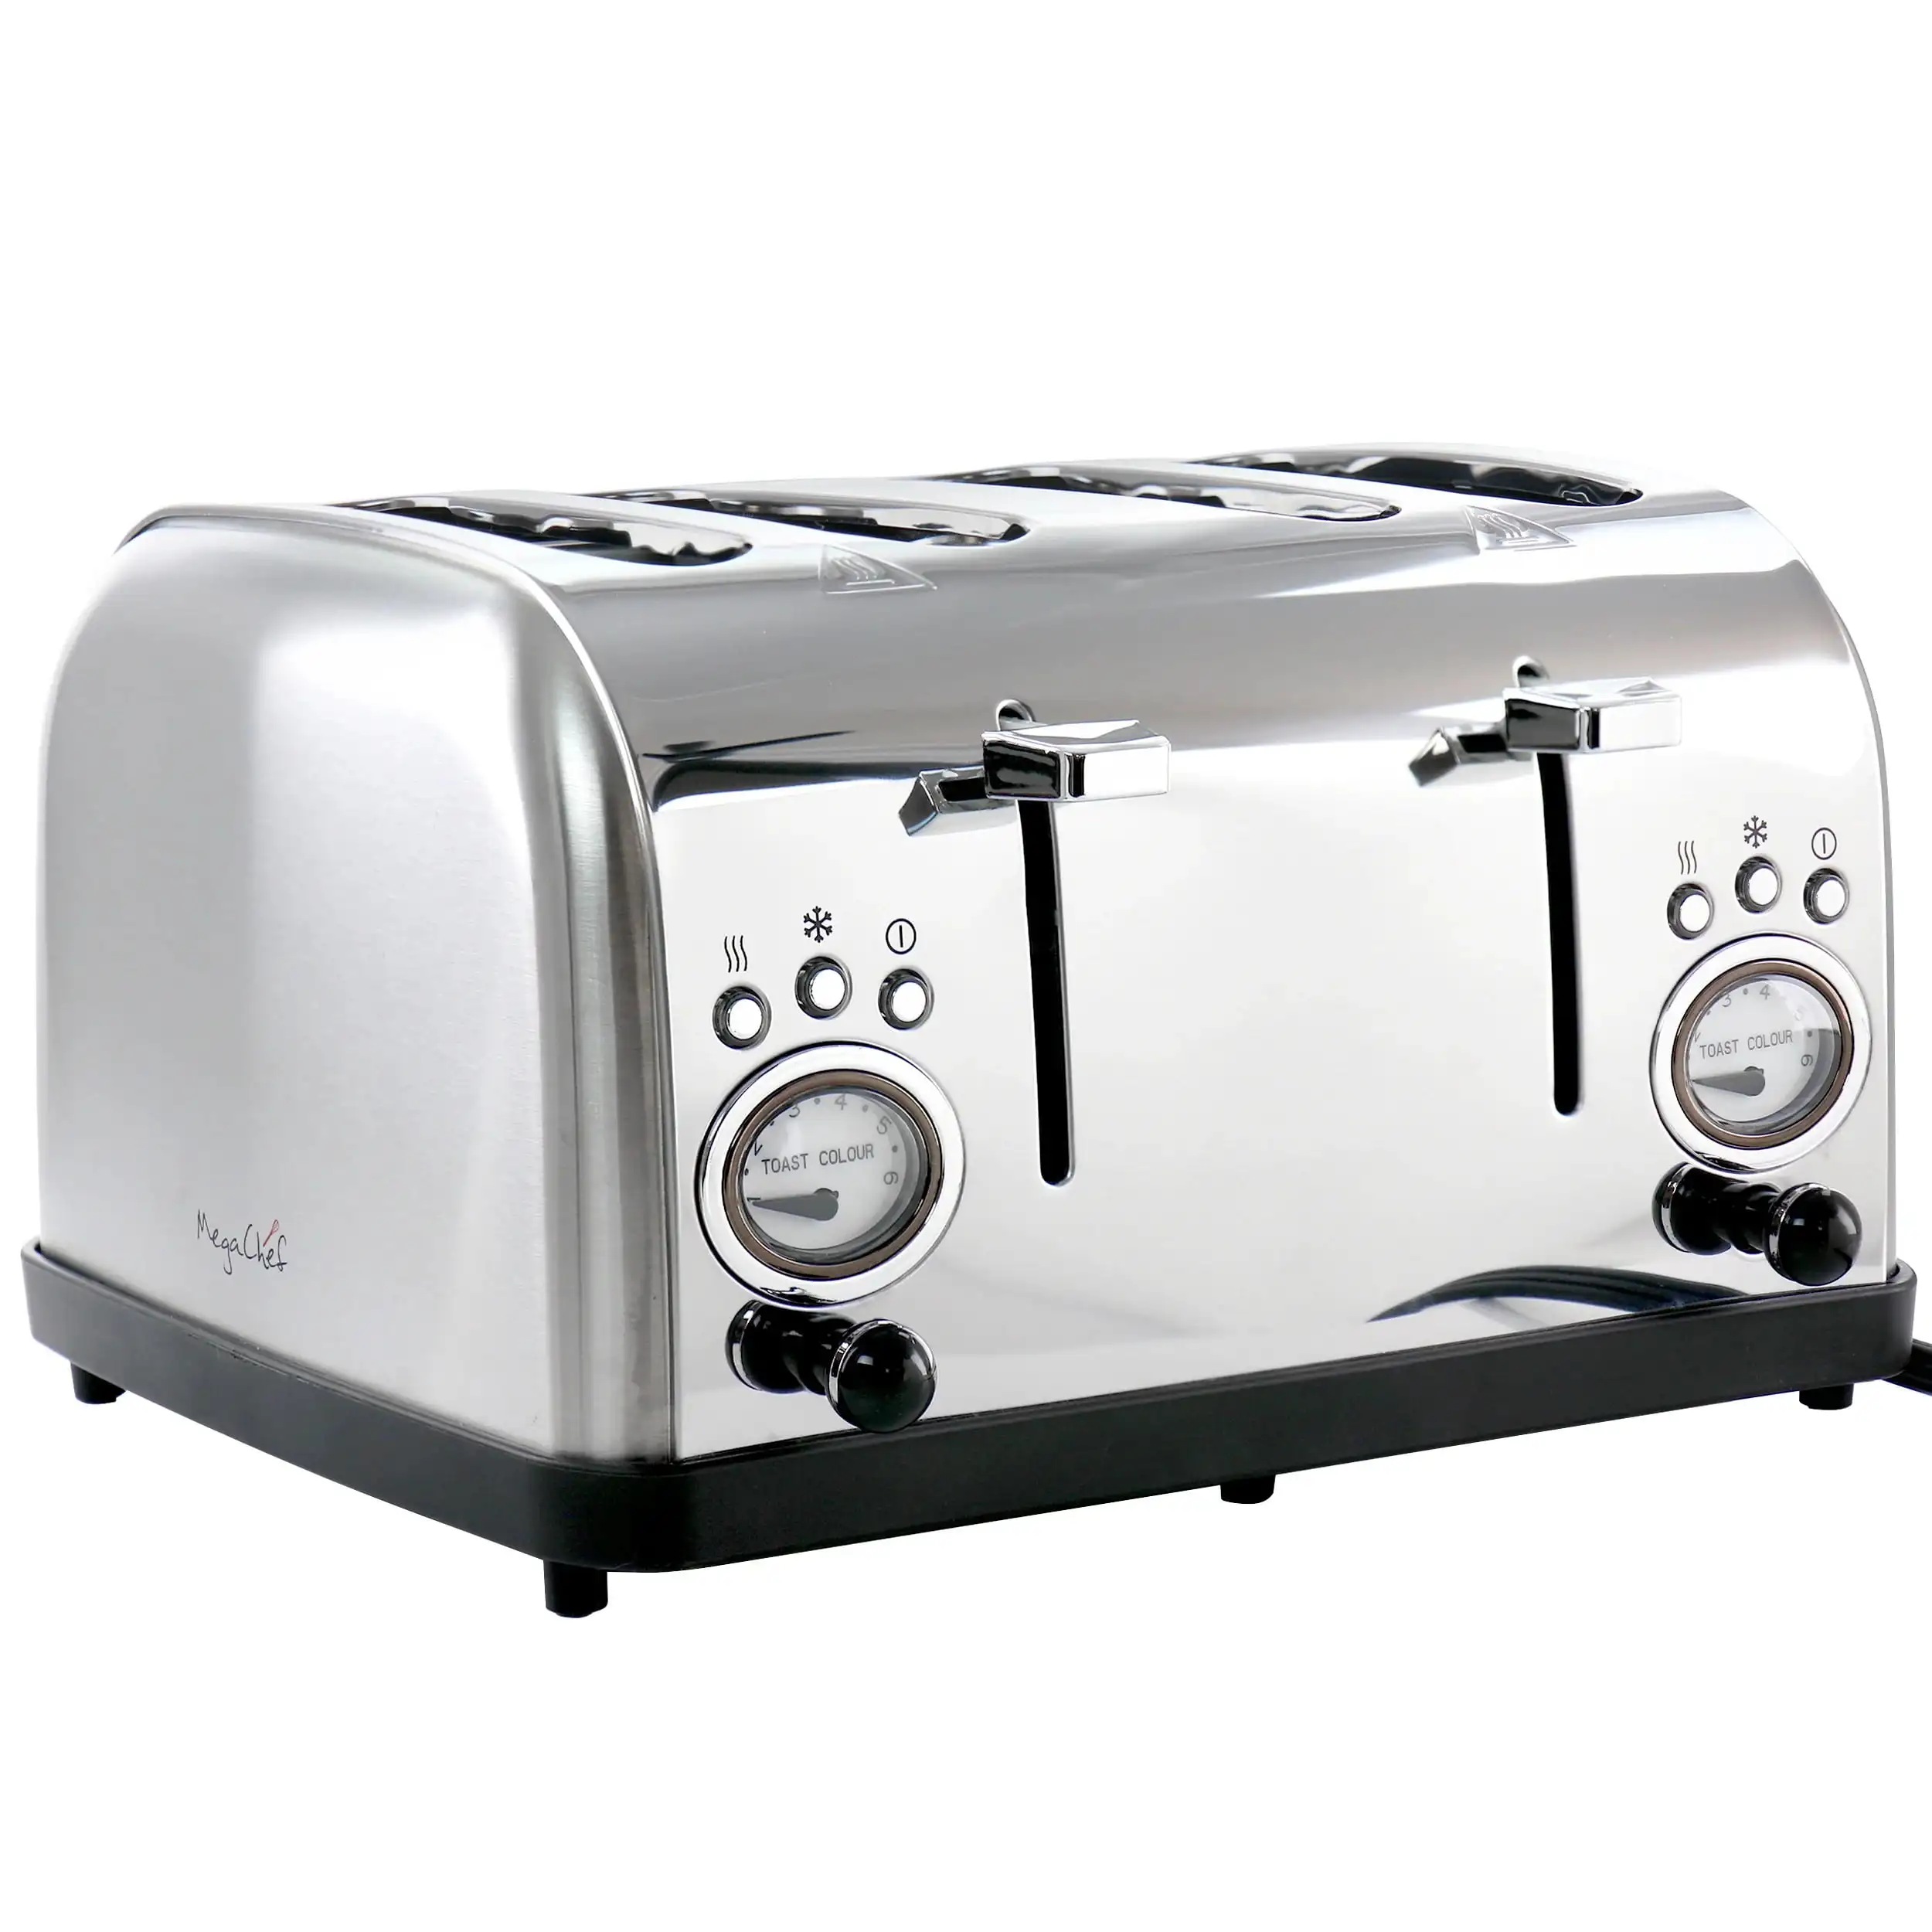 

4 Slice Wide Slot Toaster with Variable Browning in Silver